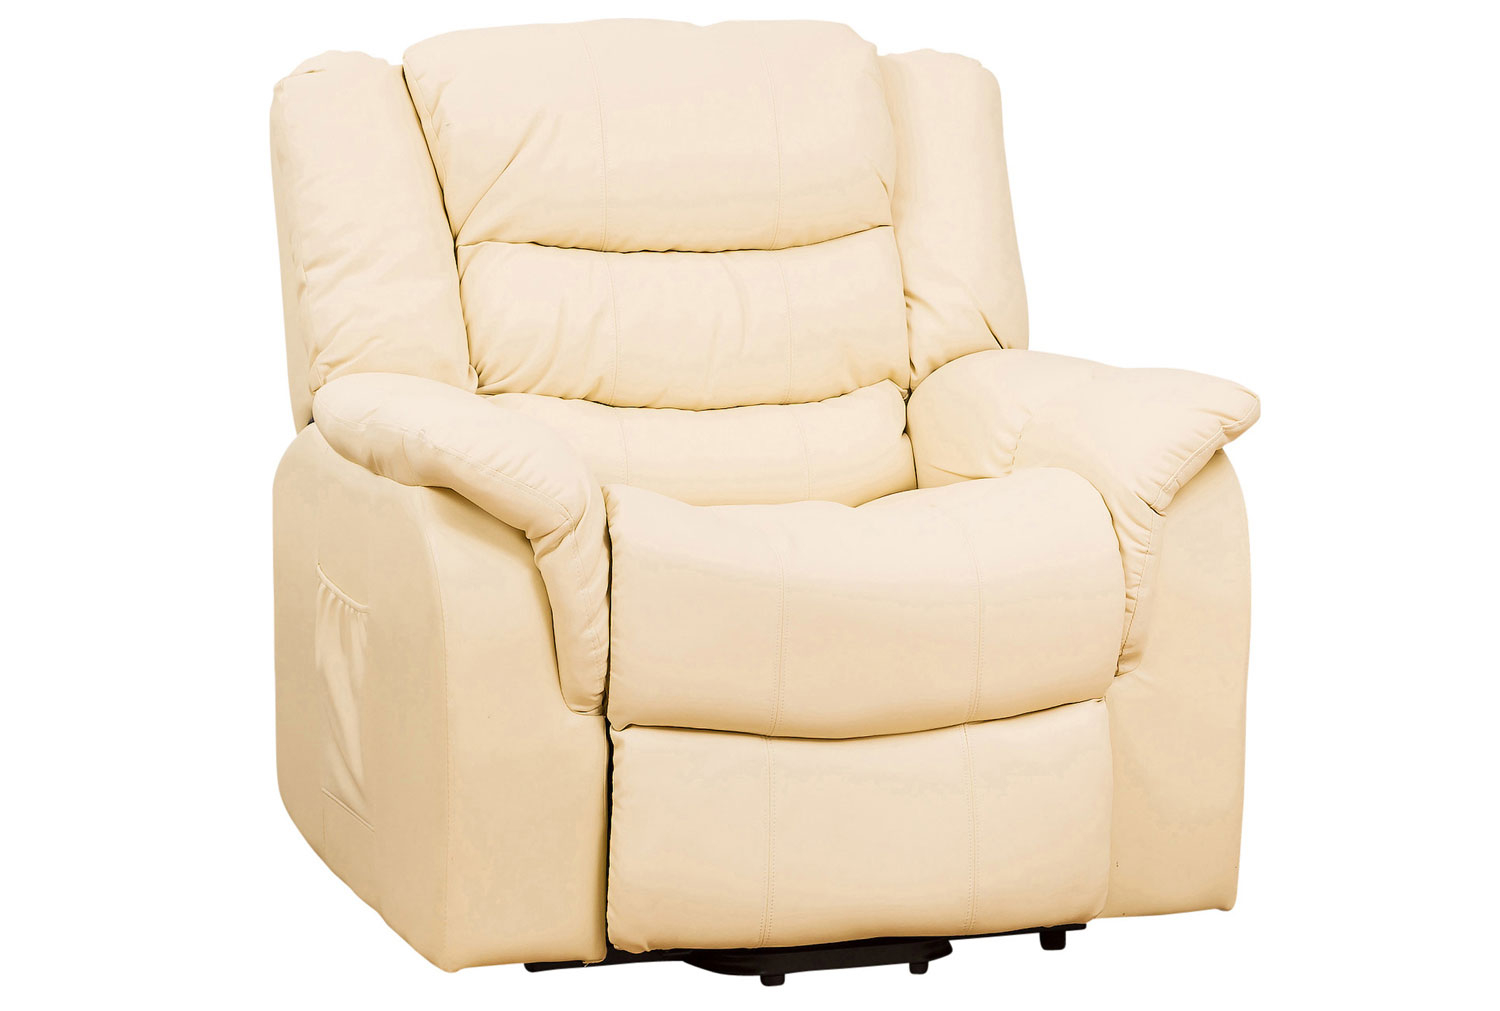 Hunter Leather Recliner Office ArmOffice Chair (Cream), Electric Recliner